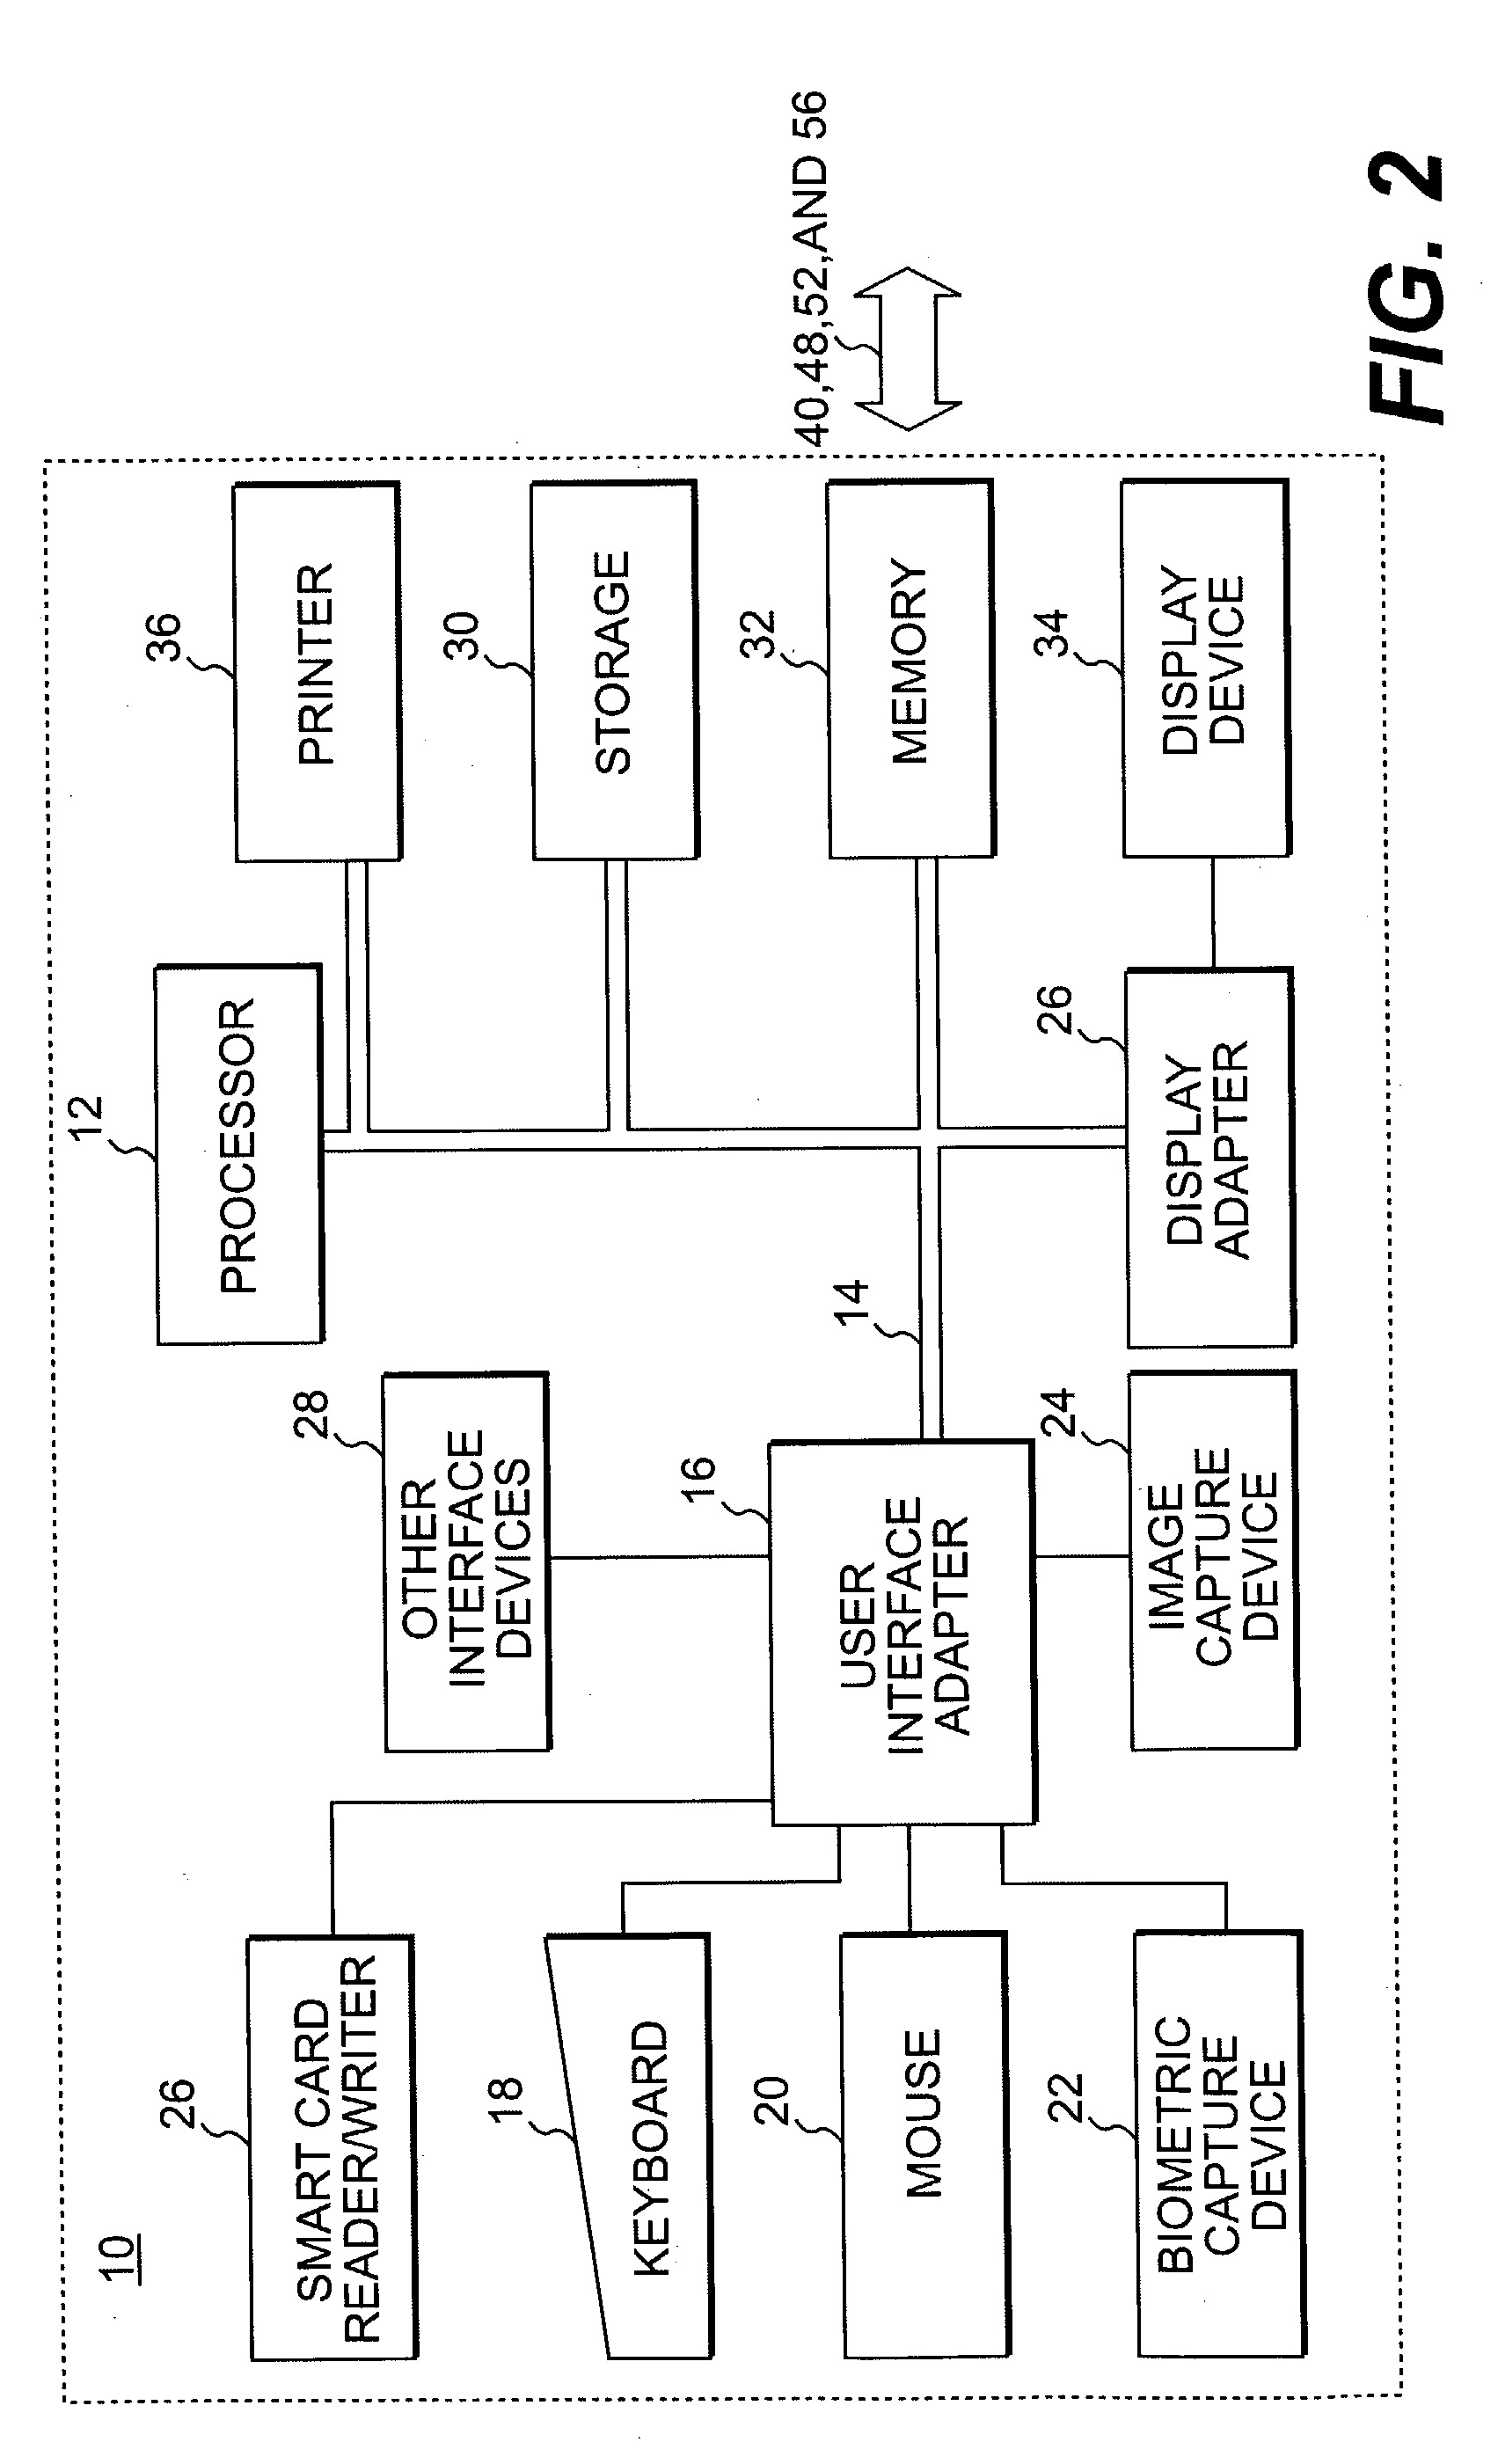 Method and apparatus for providing heightened airport security